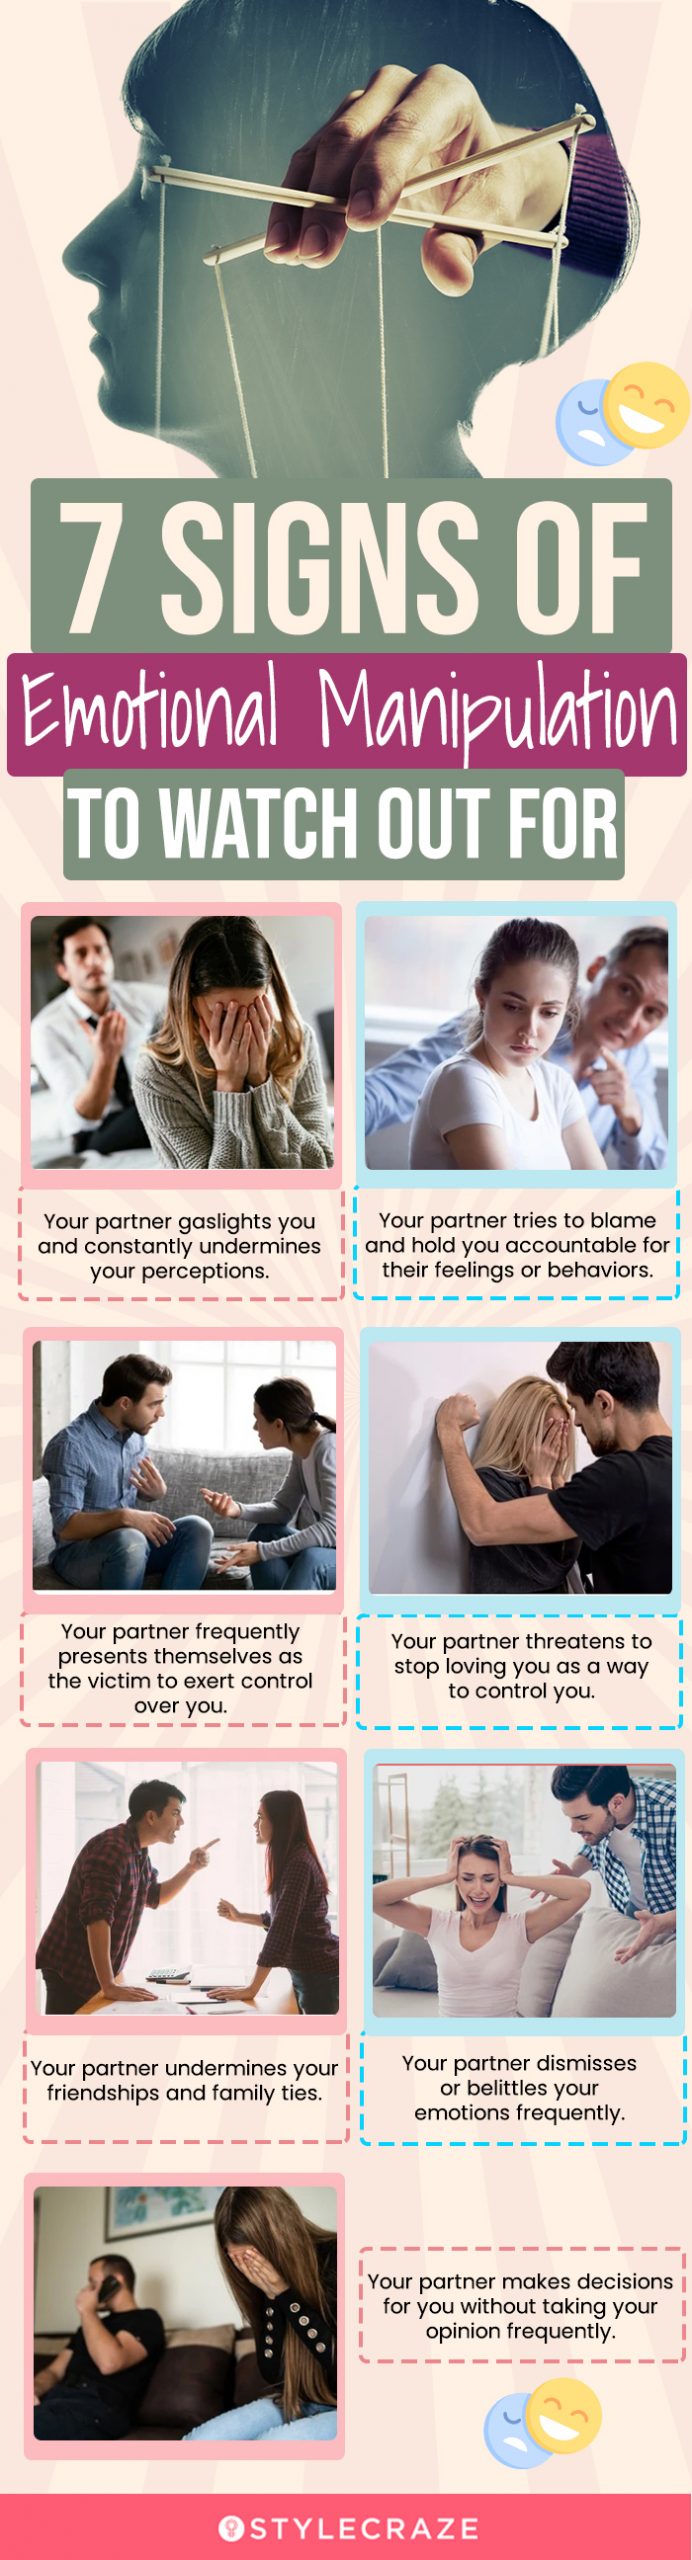 7 signs of emotional manipulation to watch out for (infographic)